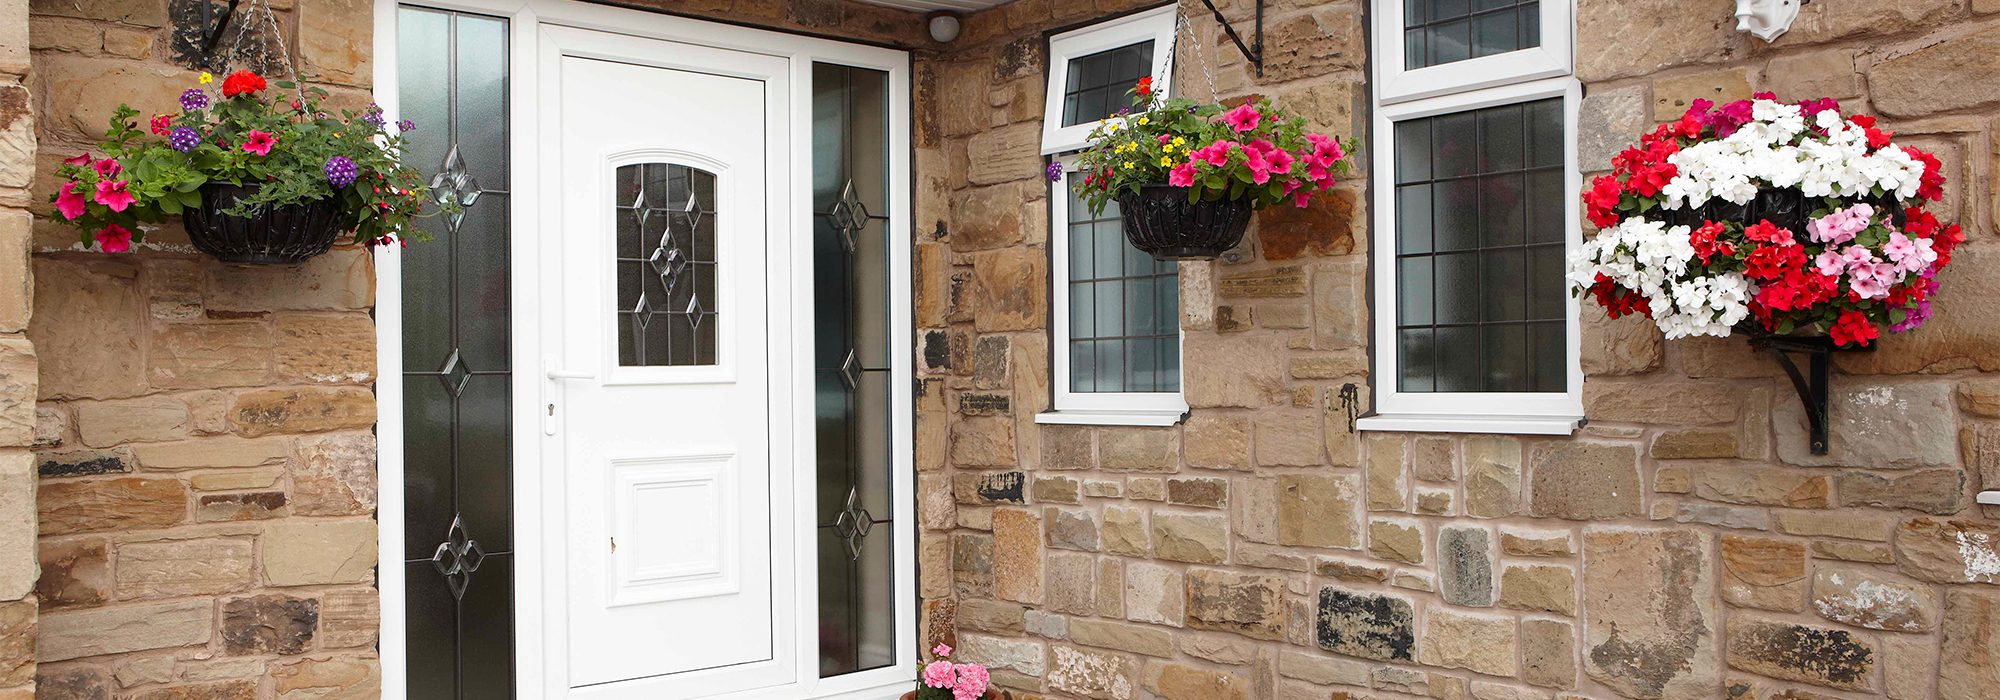 PVCu entrance door with sidelights